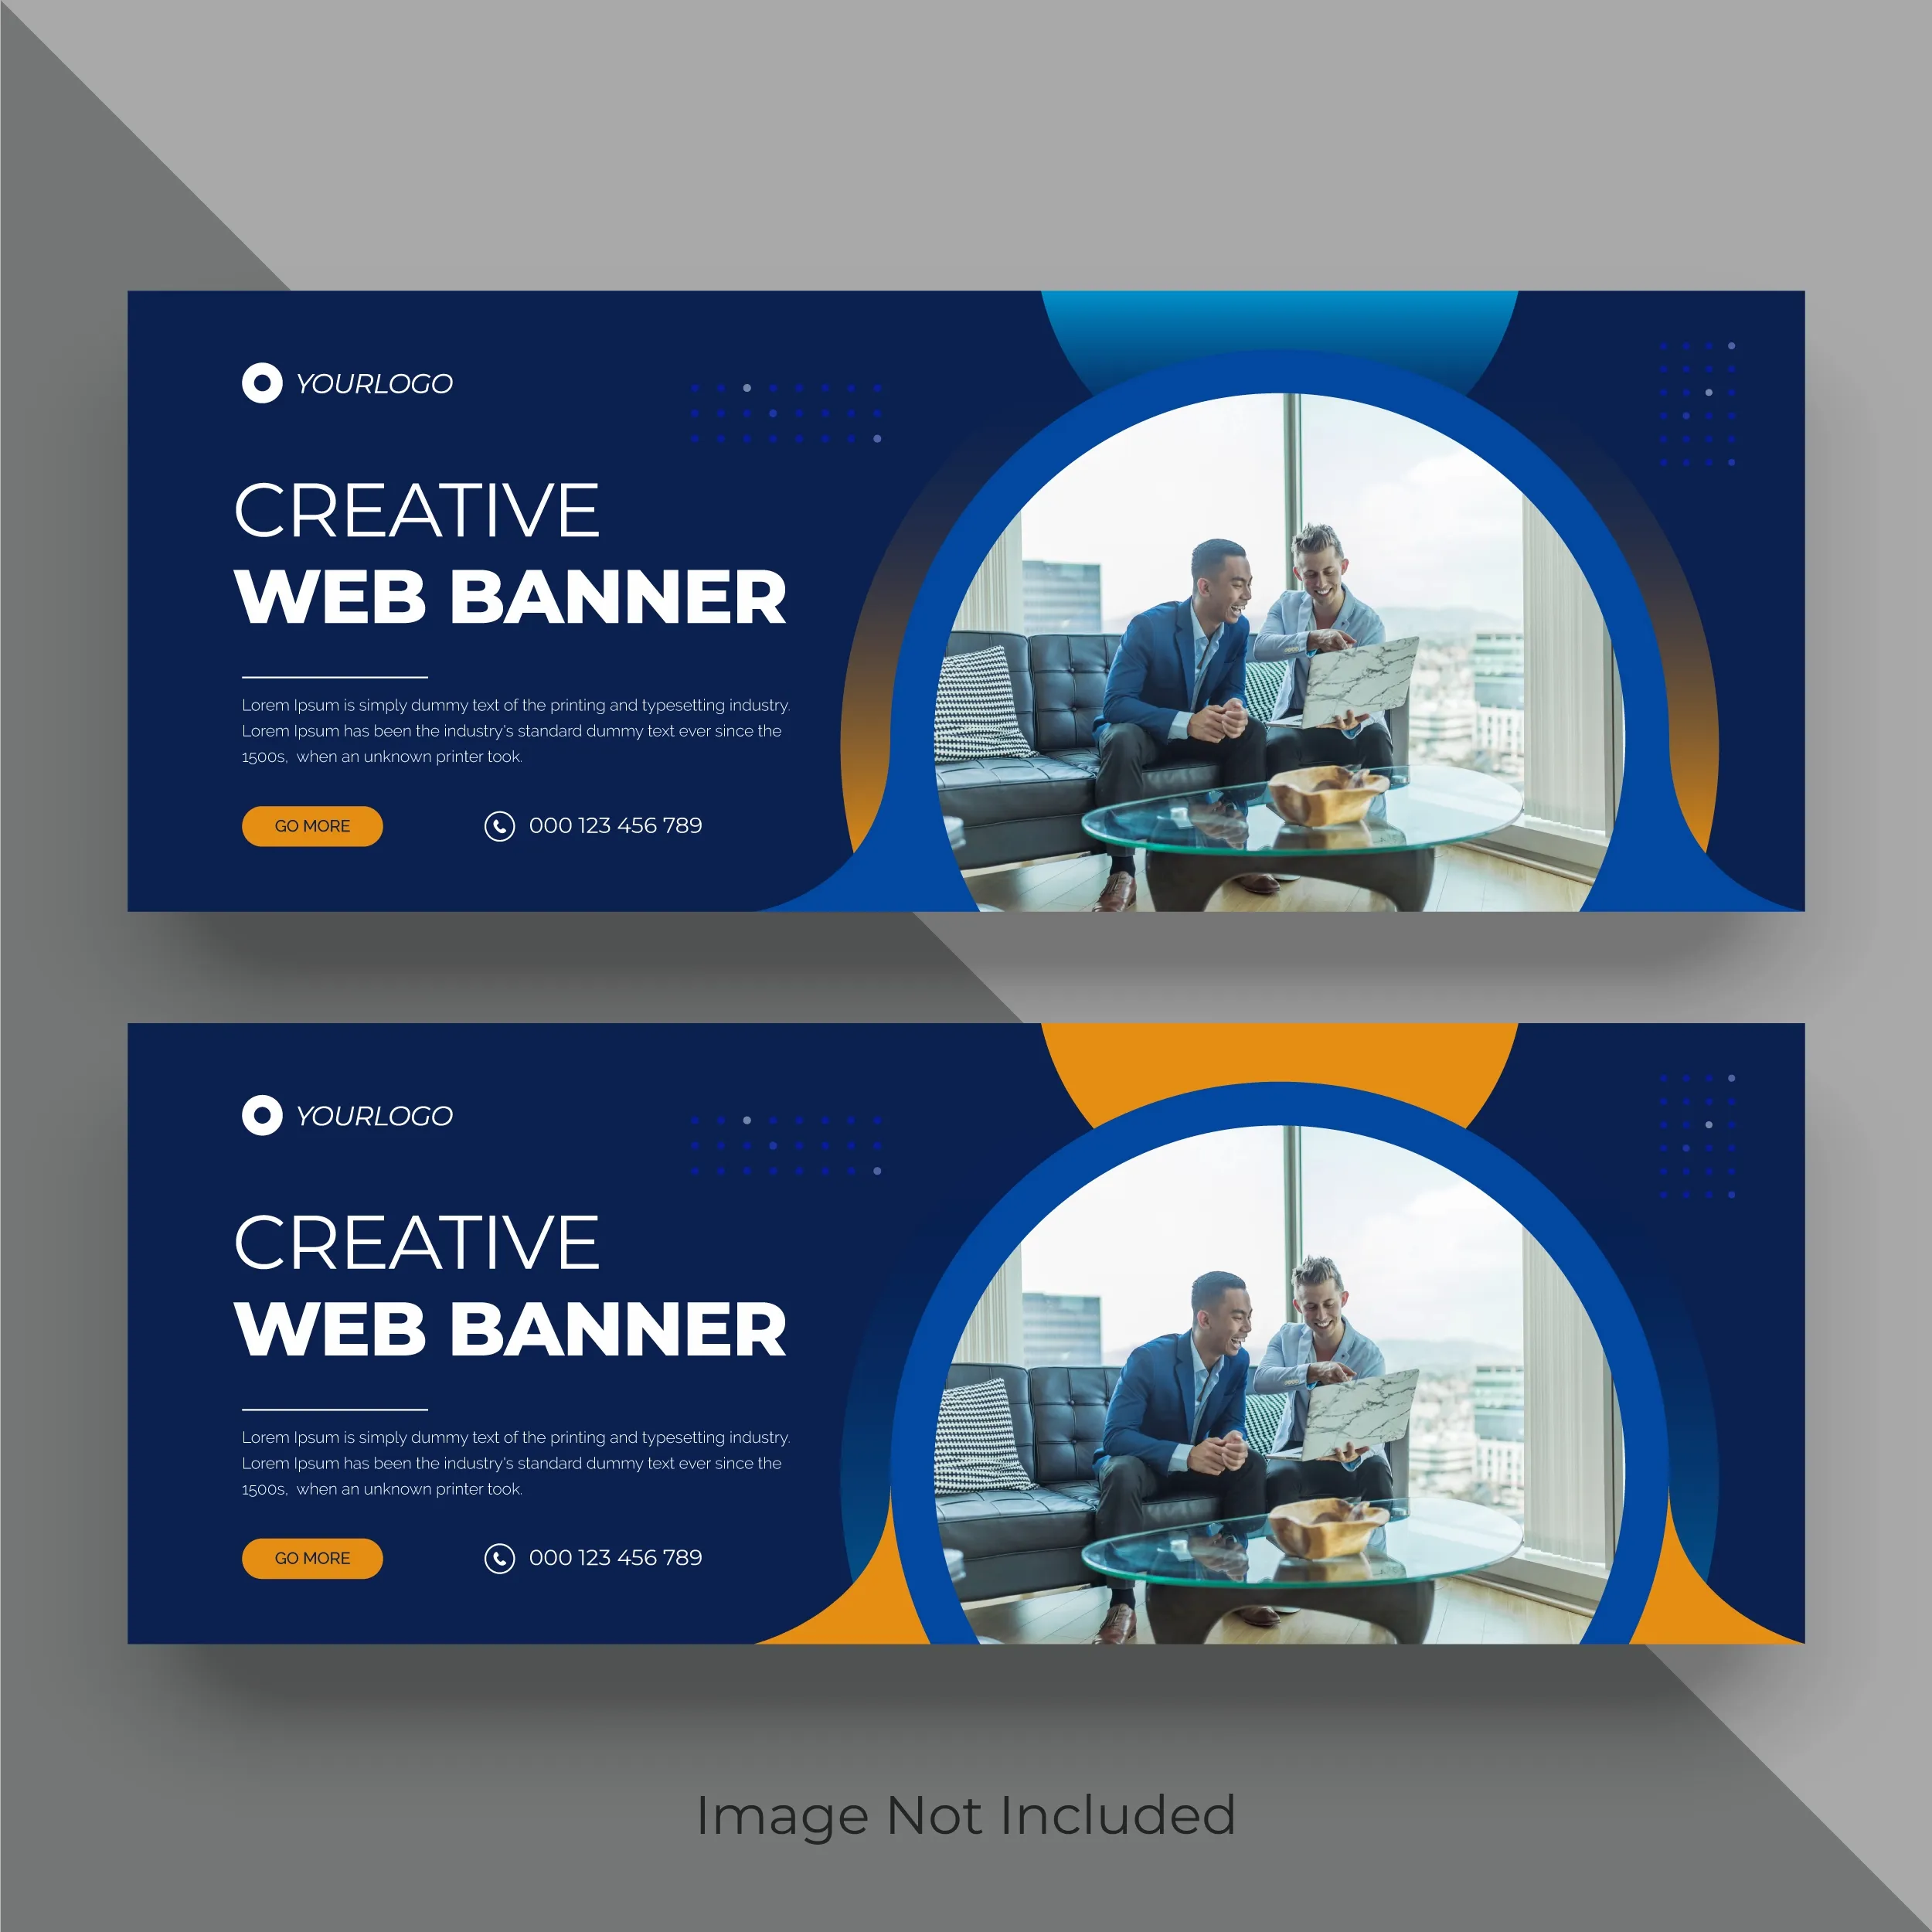 Digital marketing agency and corporate facebook cover banners